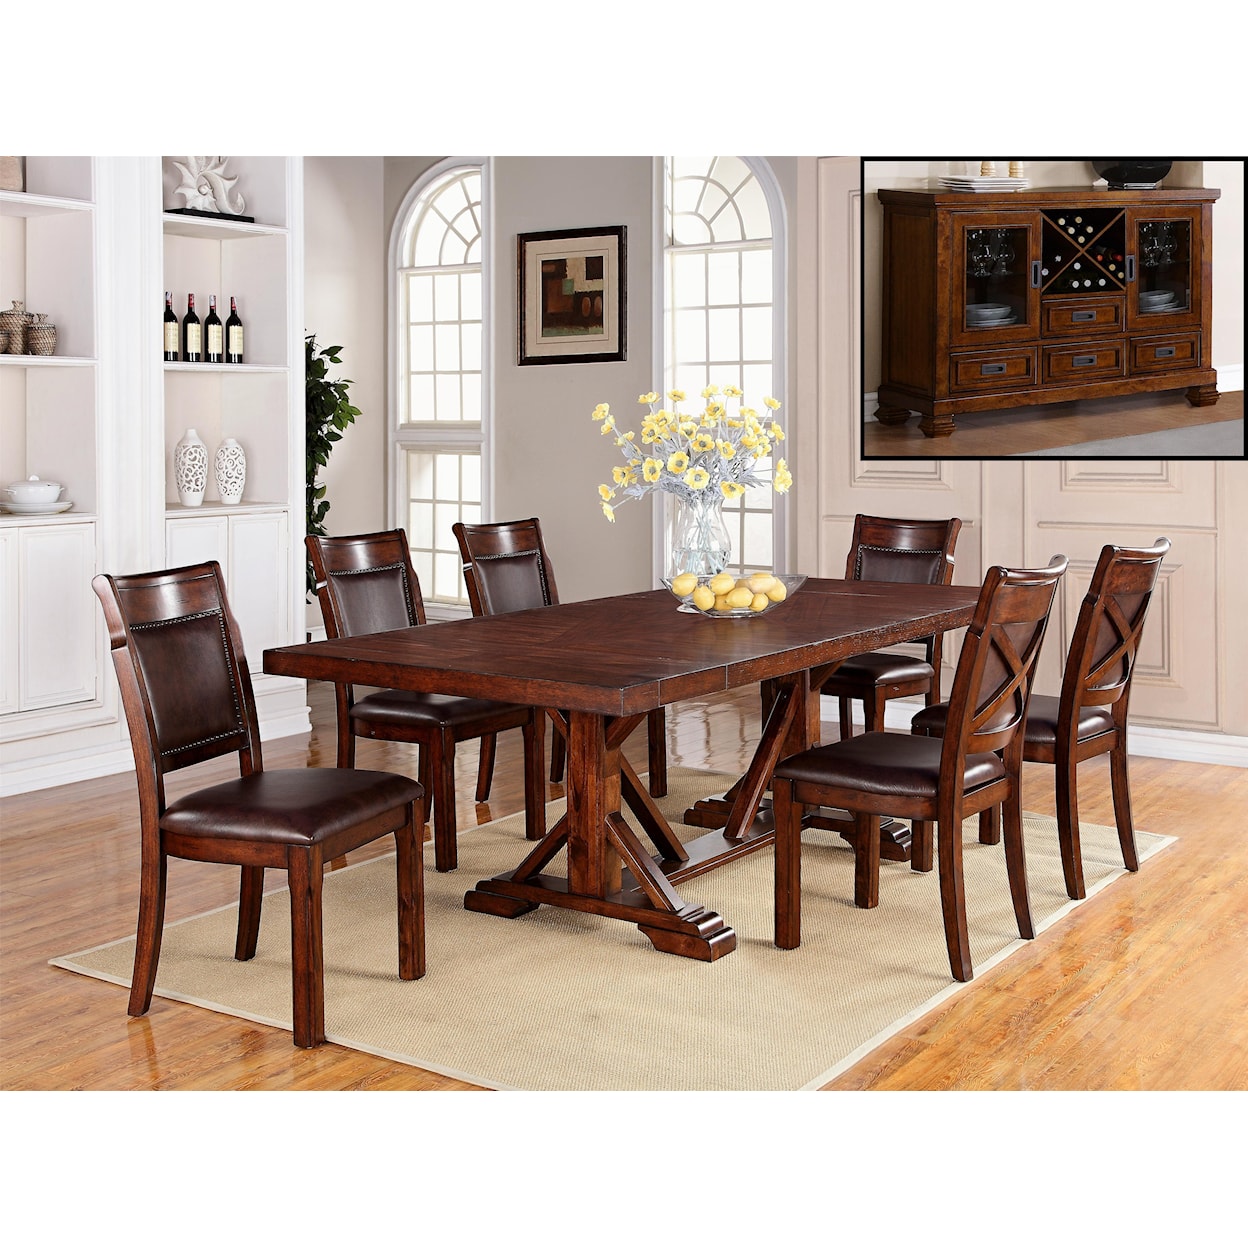 Holland House Adirondack Formal Dining Room Group